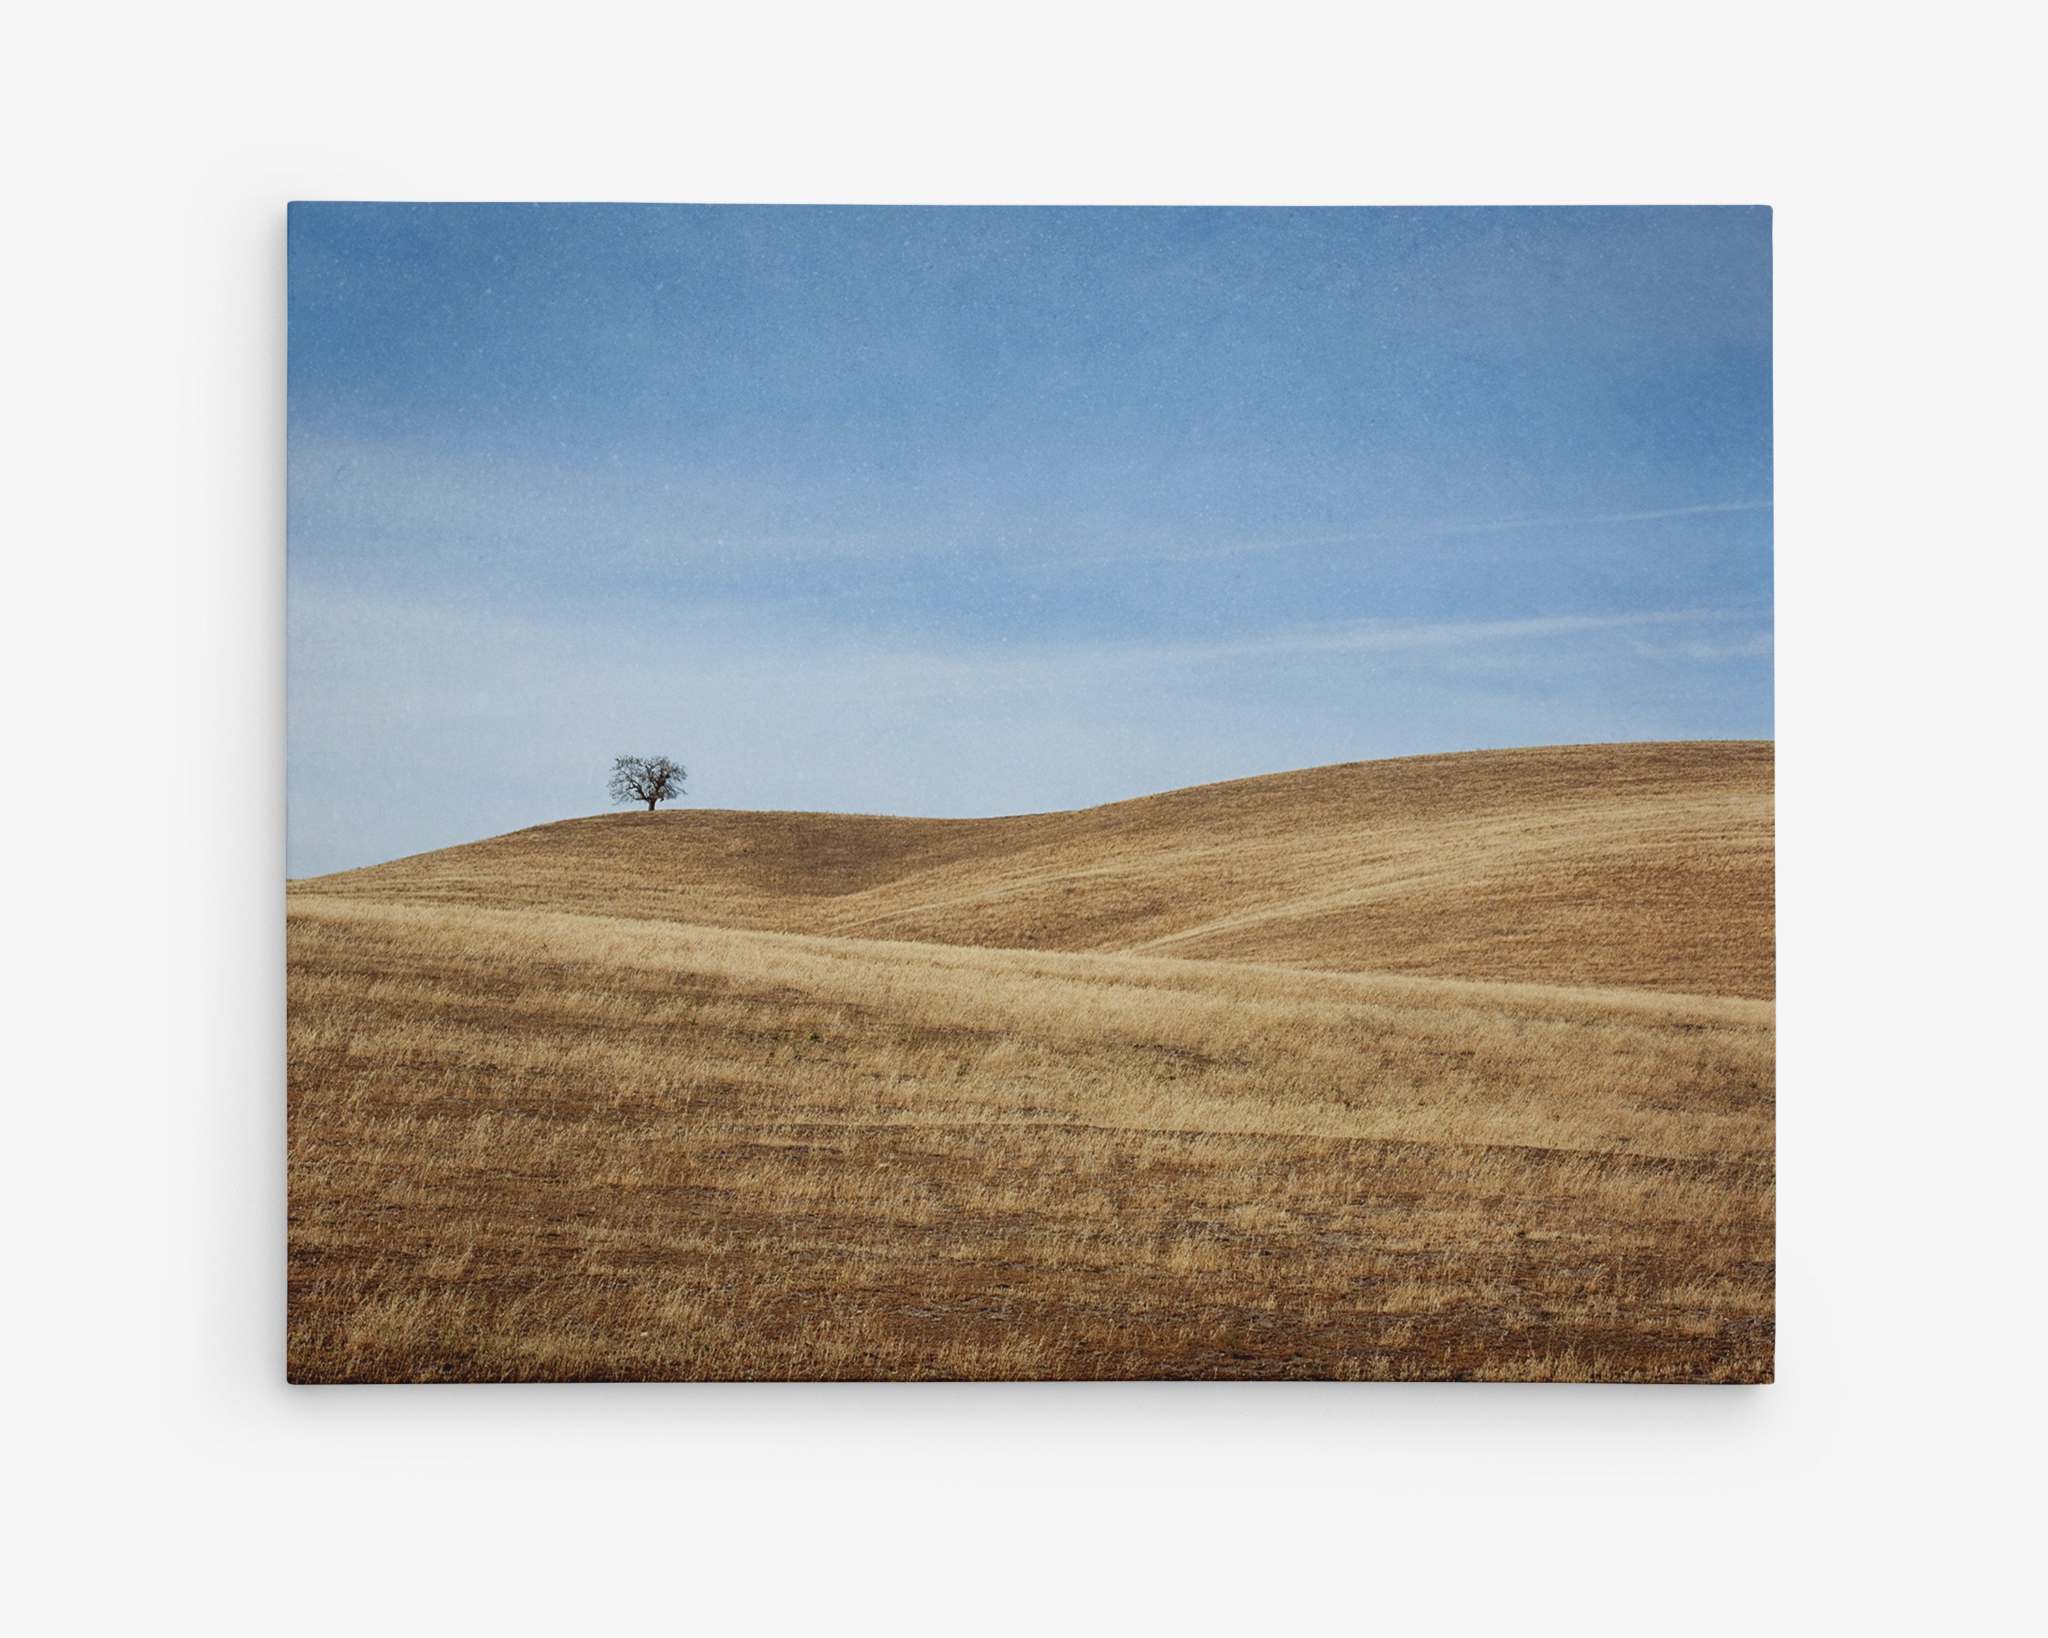 A landscape image depicting rolling golden hills under a clear blue sky. A solitary tree stands on one of the hills, adding a focal point to the serene, open expanse. Printed on premium artist-grade canvas, this ready-to-hang solution highlights the natural beauty and tranquility of the scene. This is California Central Coast Landscape Canvas Wall Decor &#39;Golden Ynez&#39; by Offley Green.